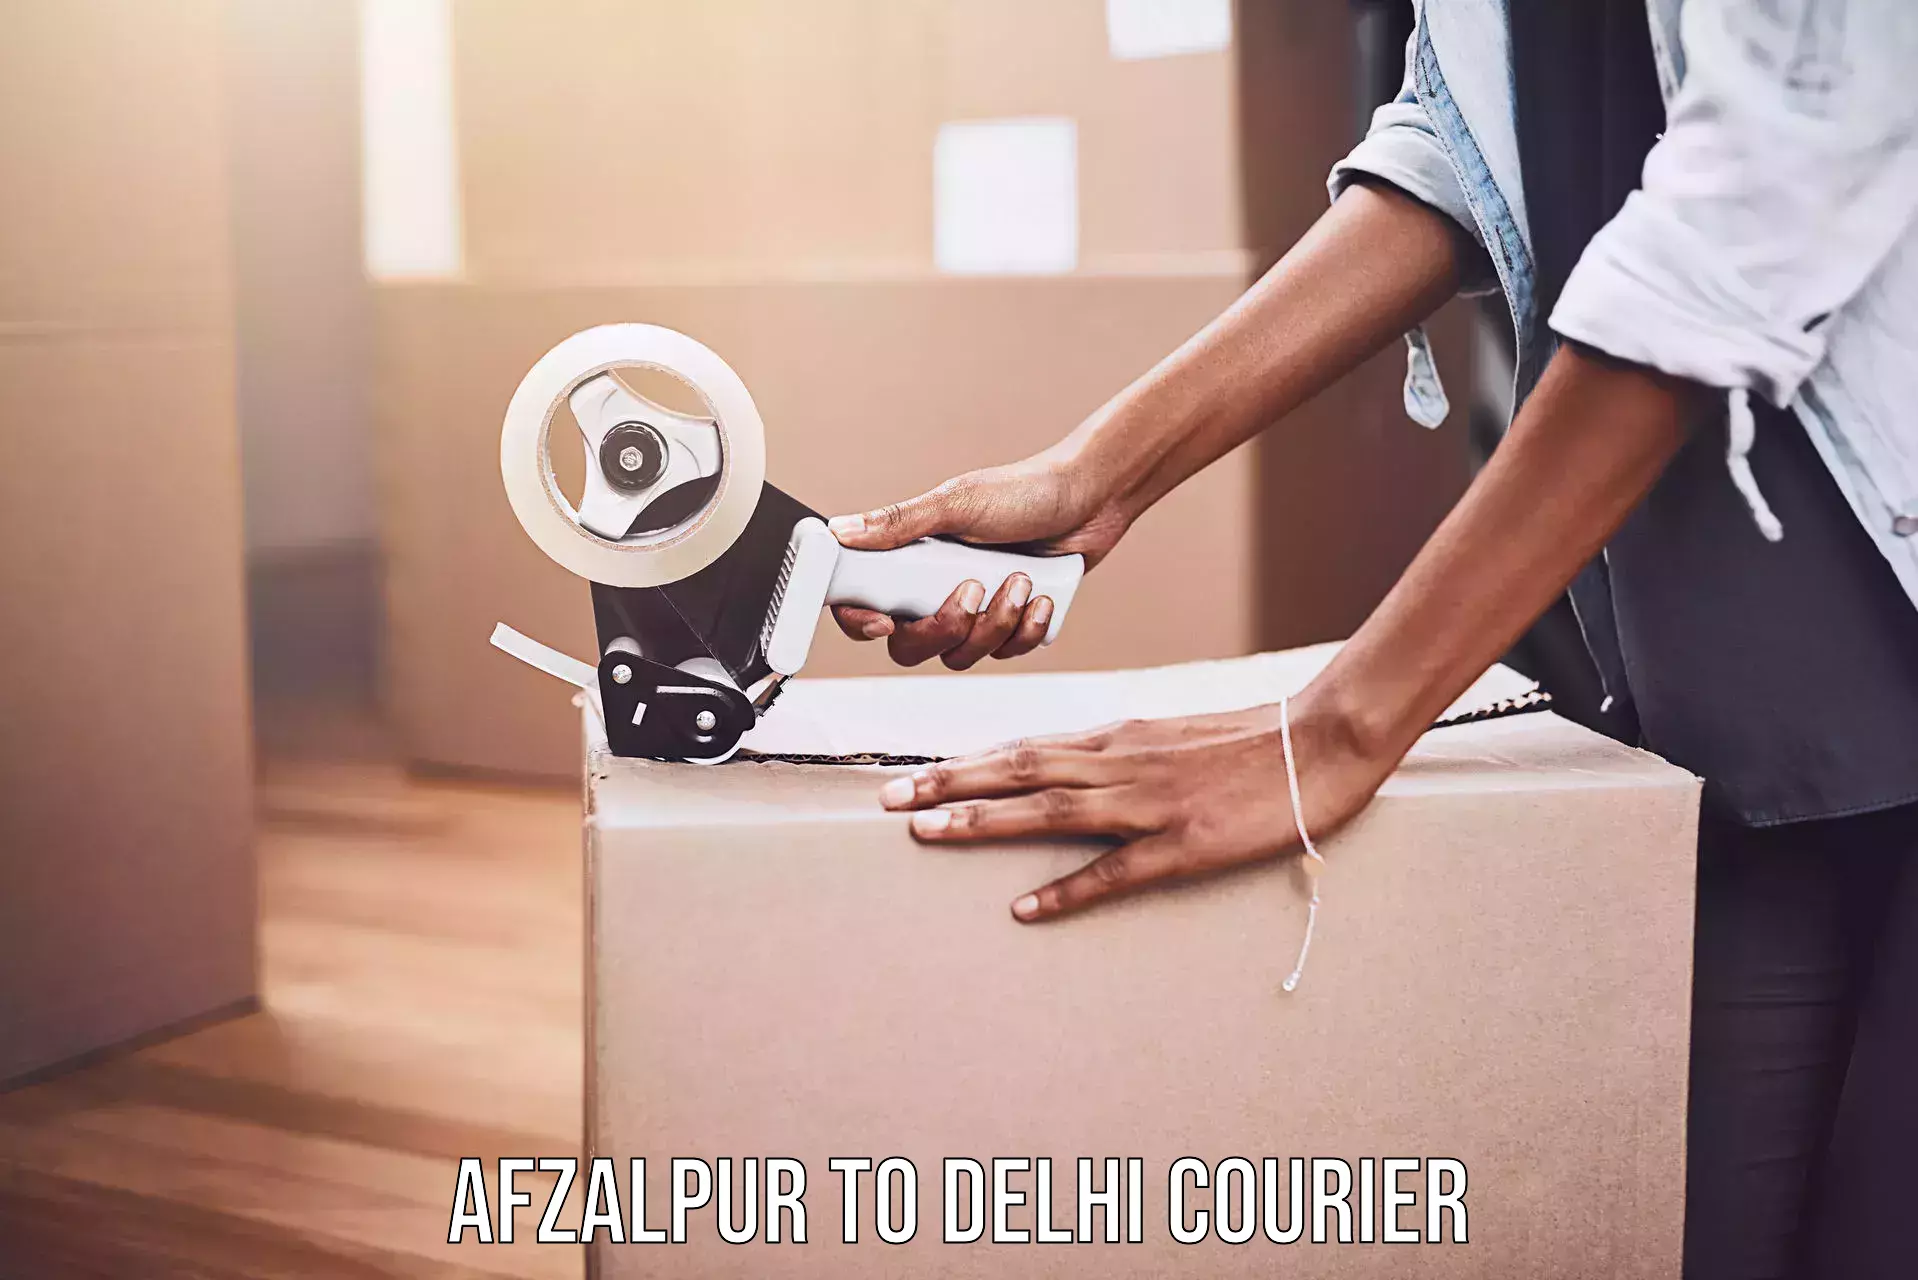 Parcel handling and care Afzalpur to Lodhi Road